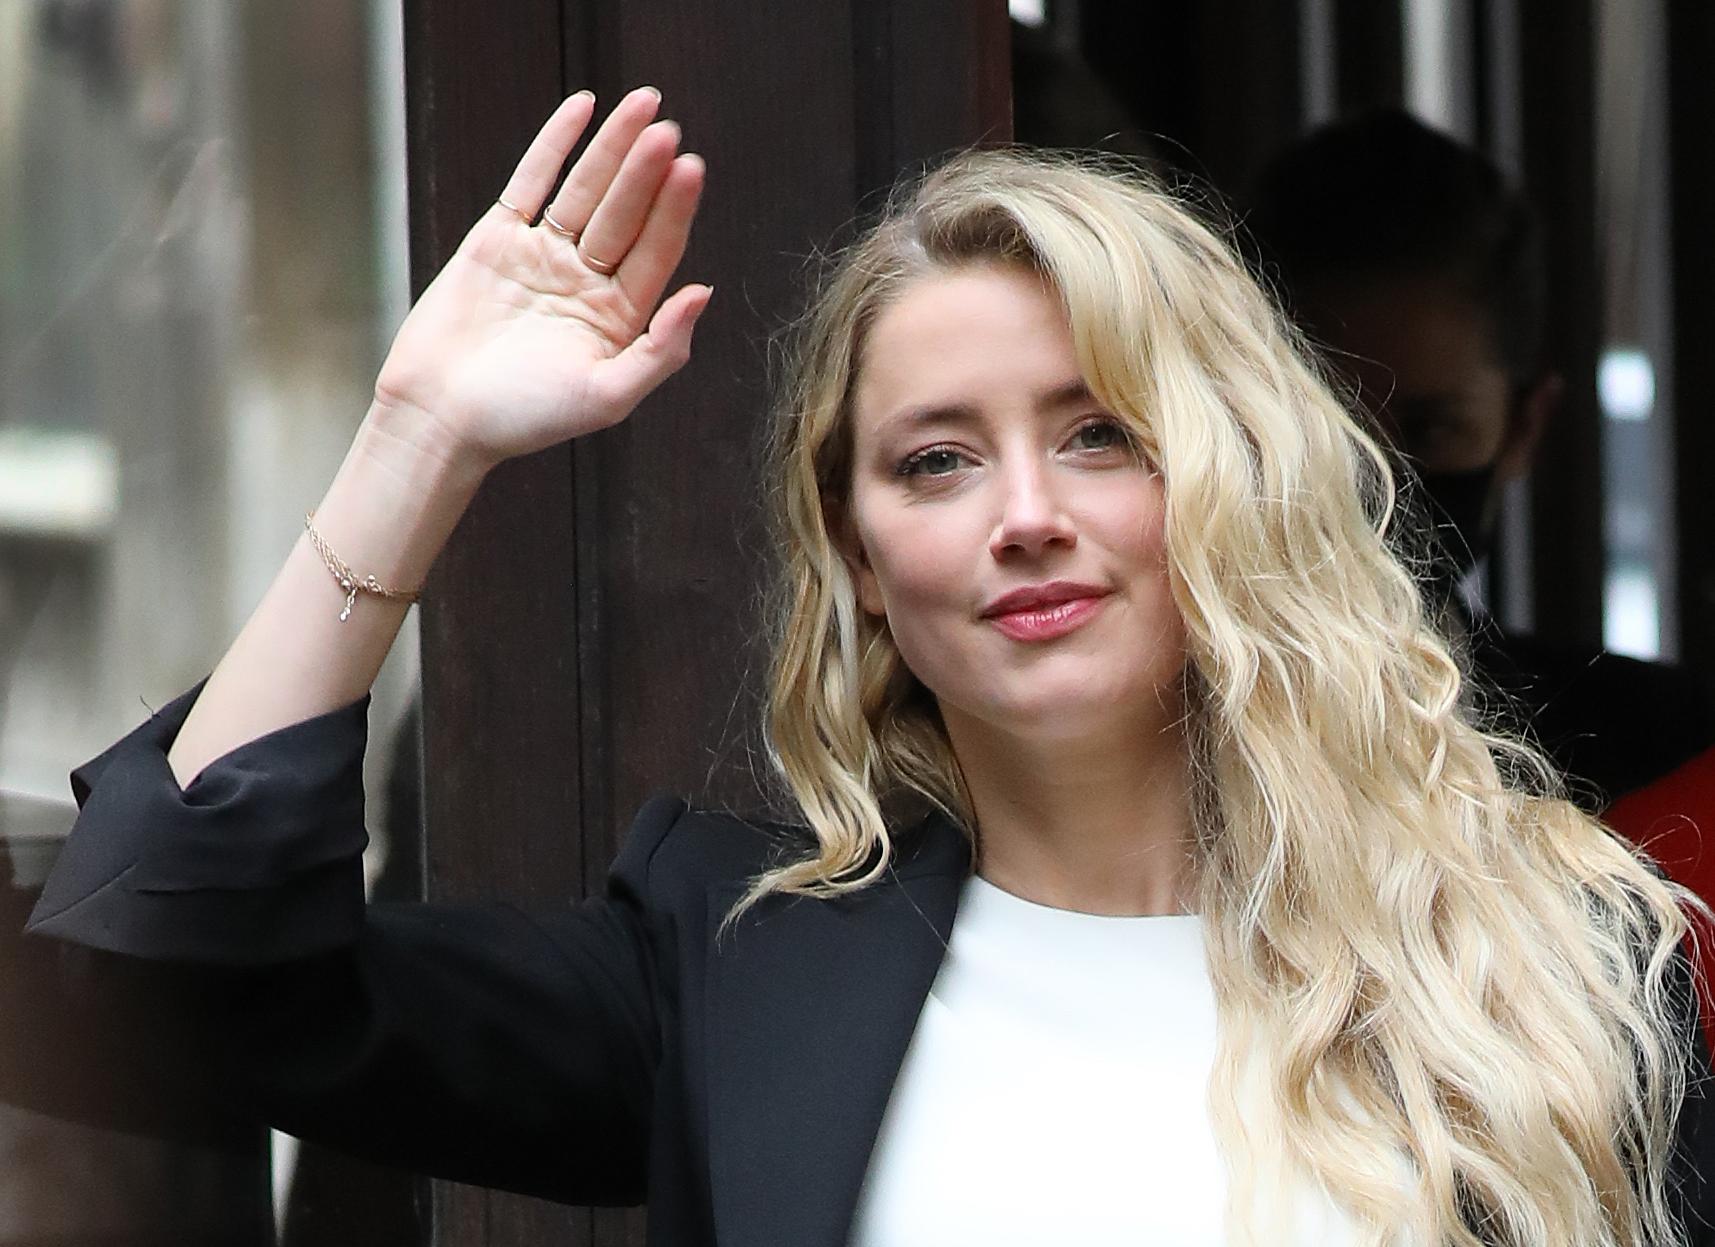 Amber Heard Looking Forward To ‘Mommy Time’ With Daughter Following Johnny Depp Verdict